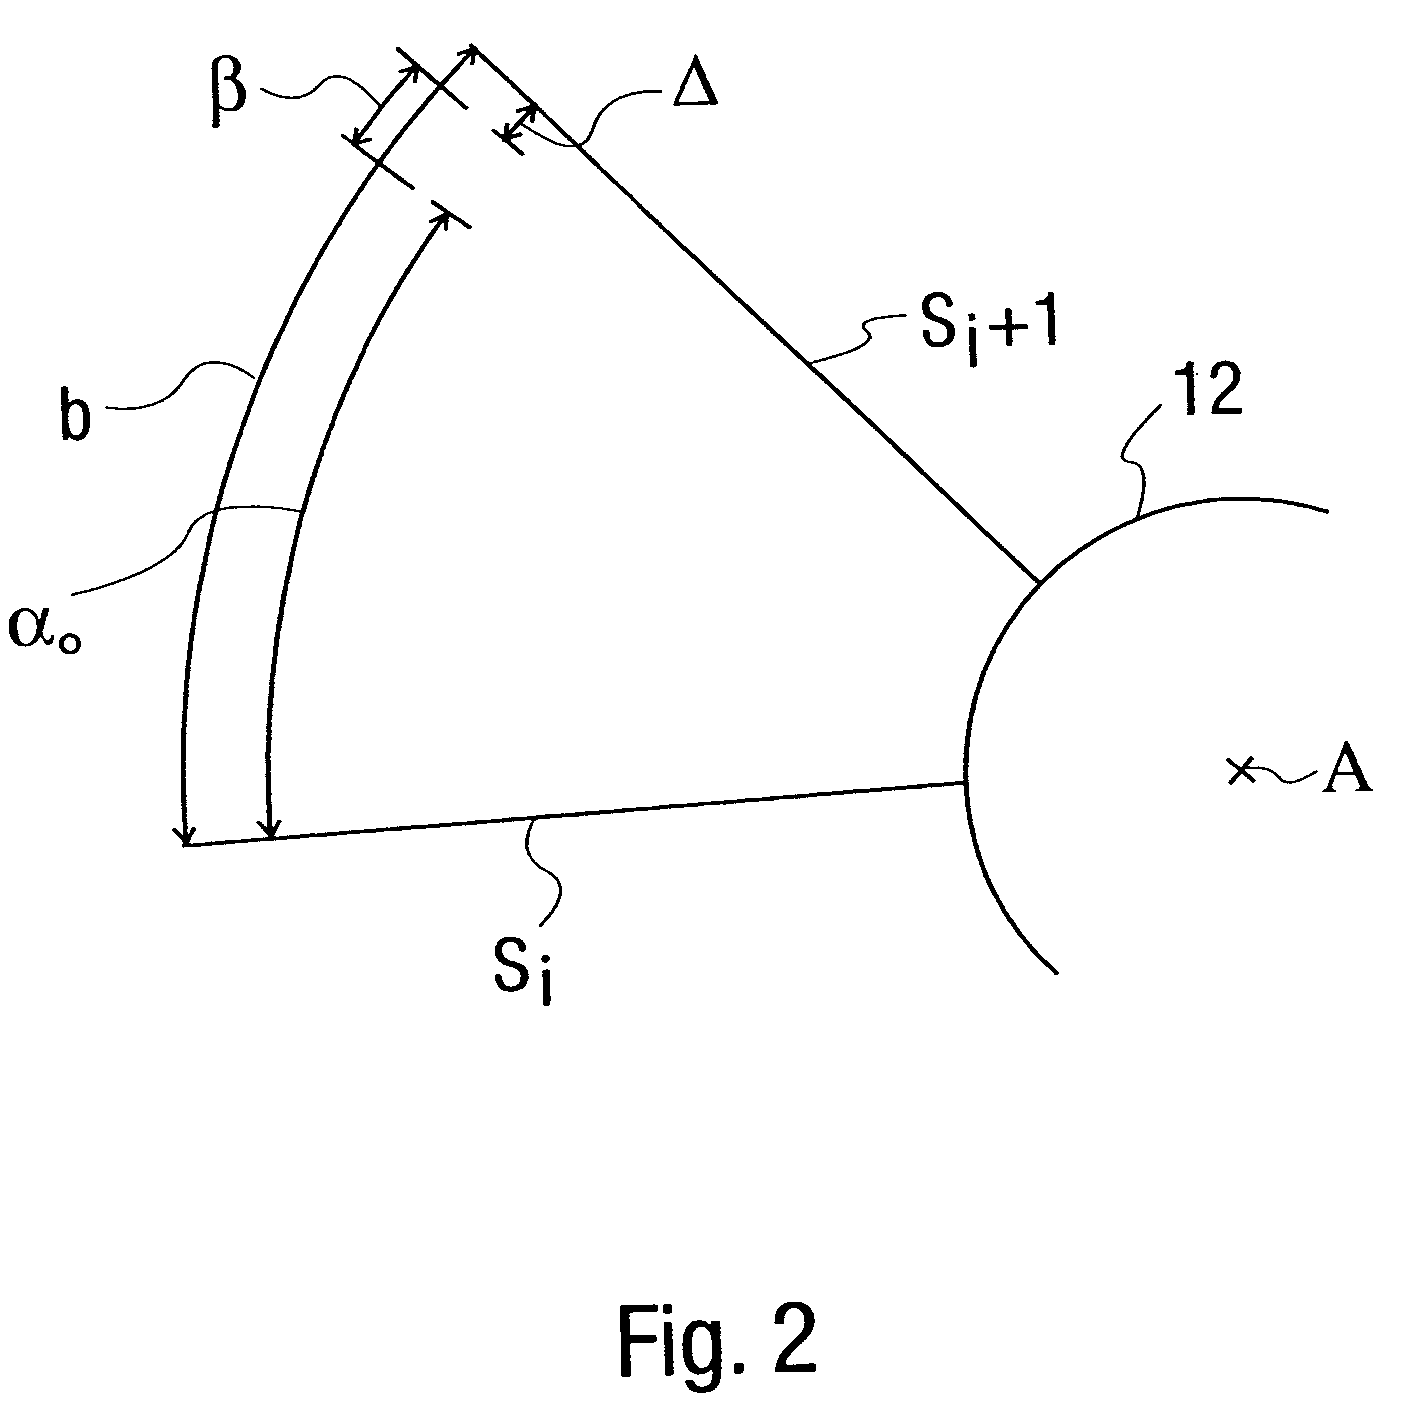 Conveying member, especially rotor or stator, for conveying a flowable, preferably gaseous medium